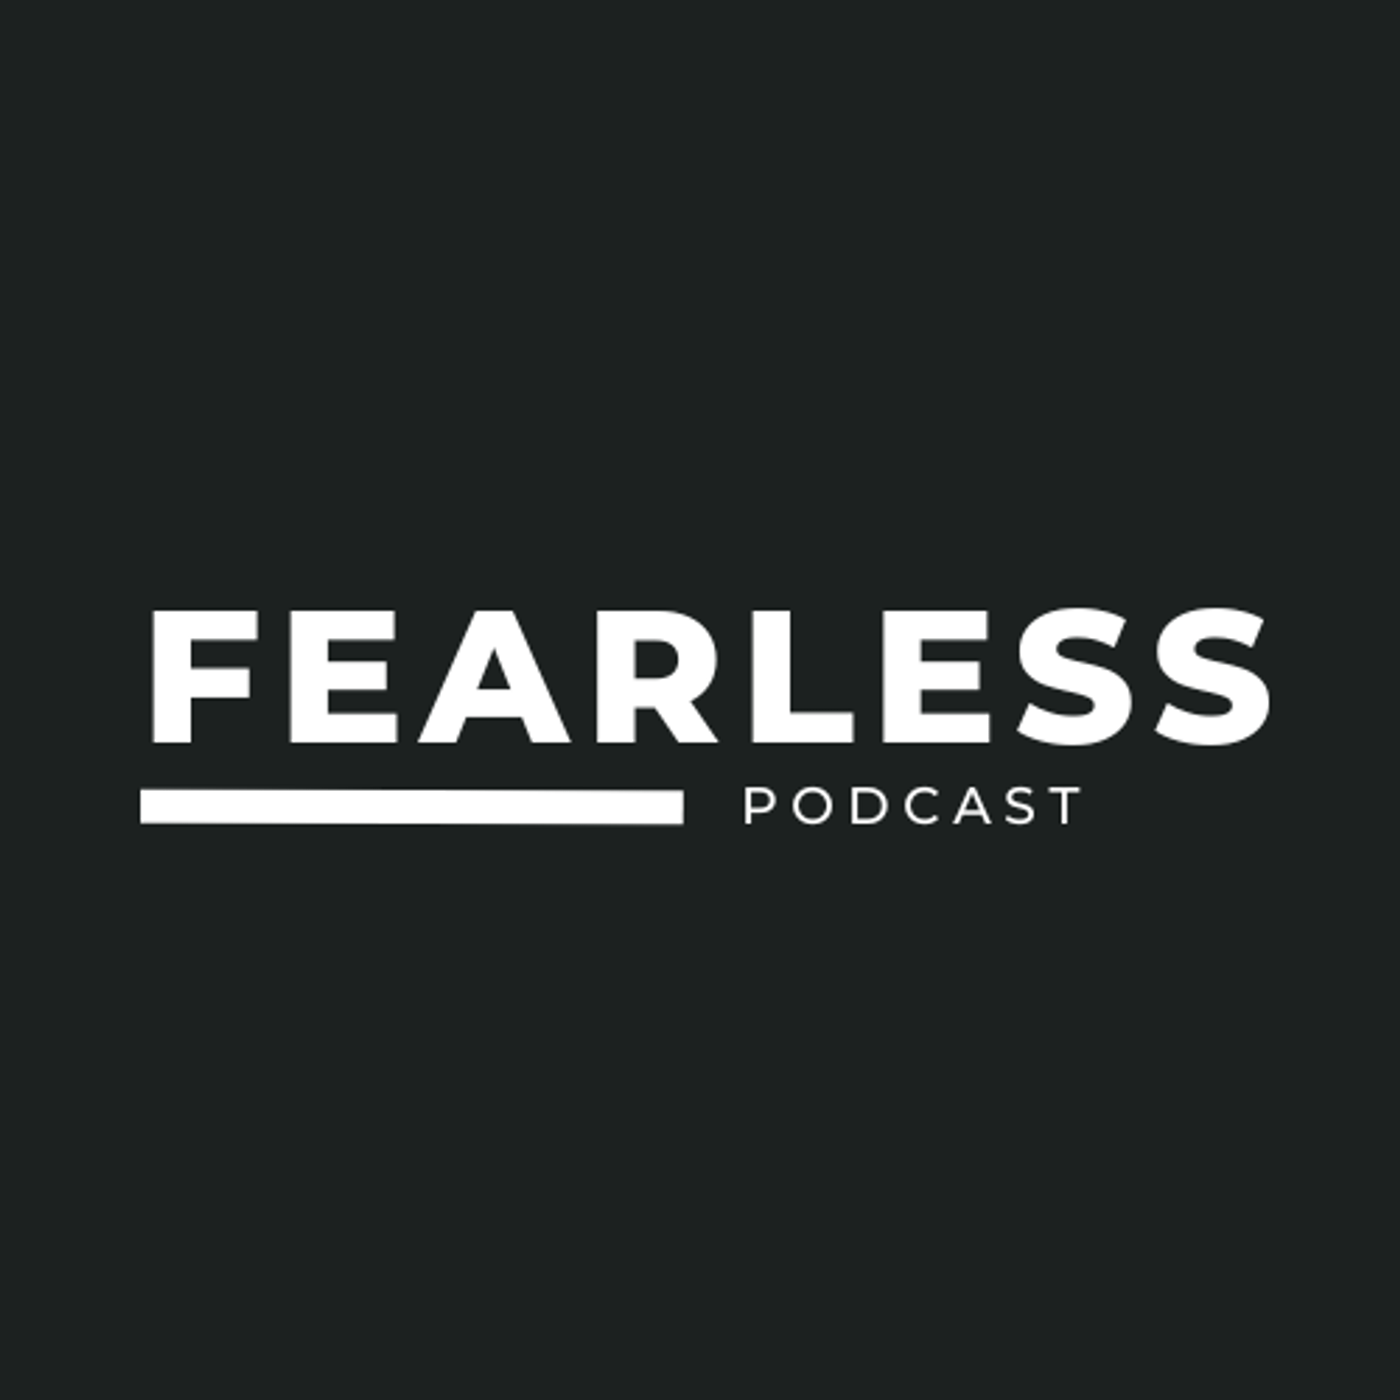 The Fearless Podcast